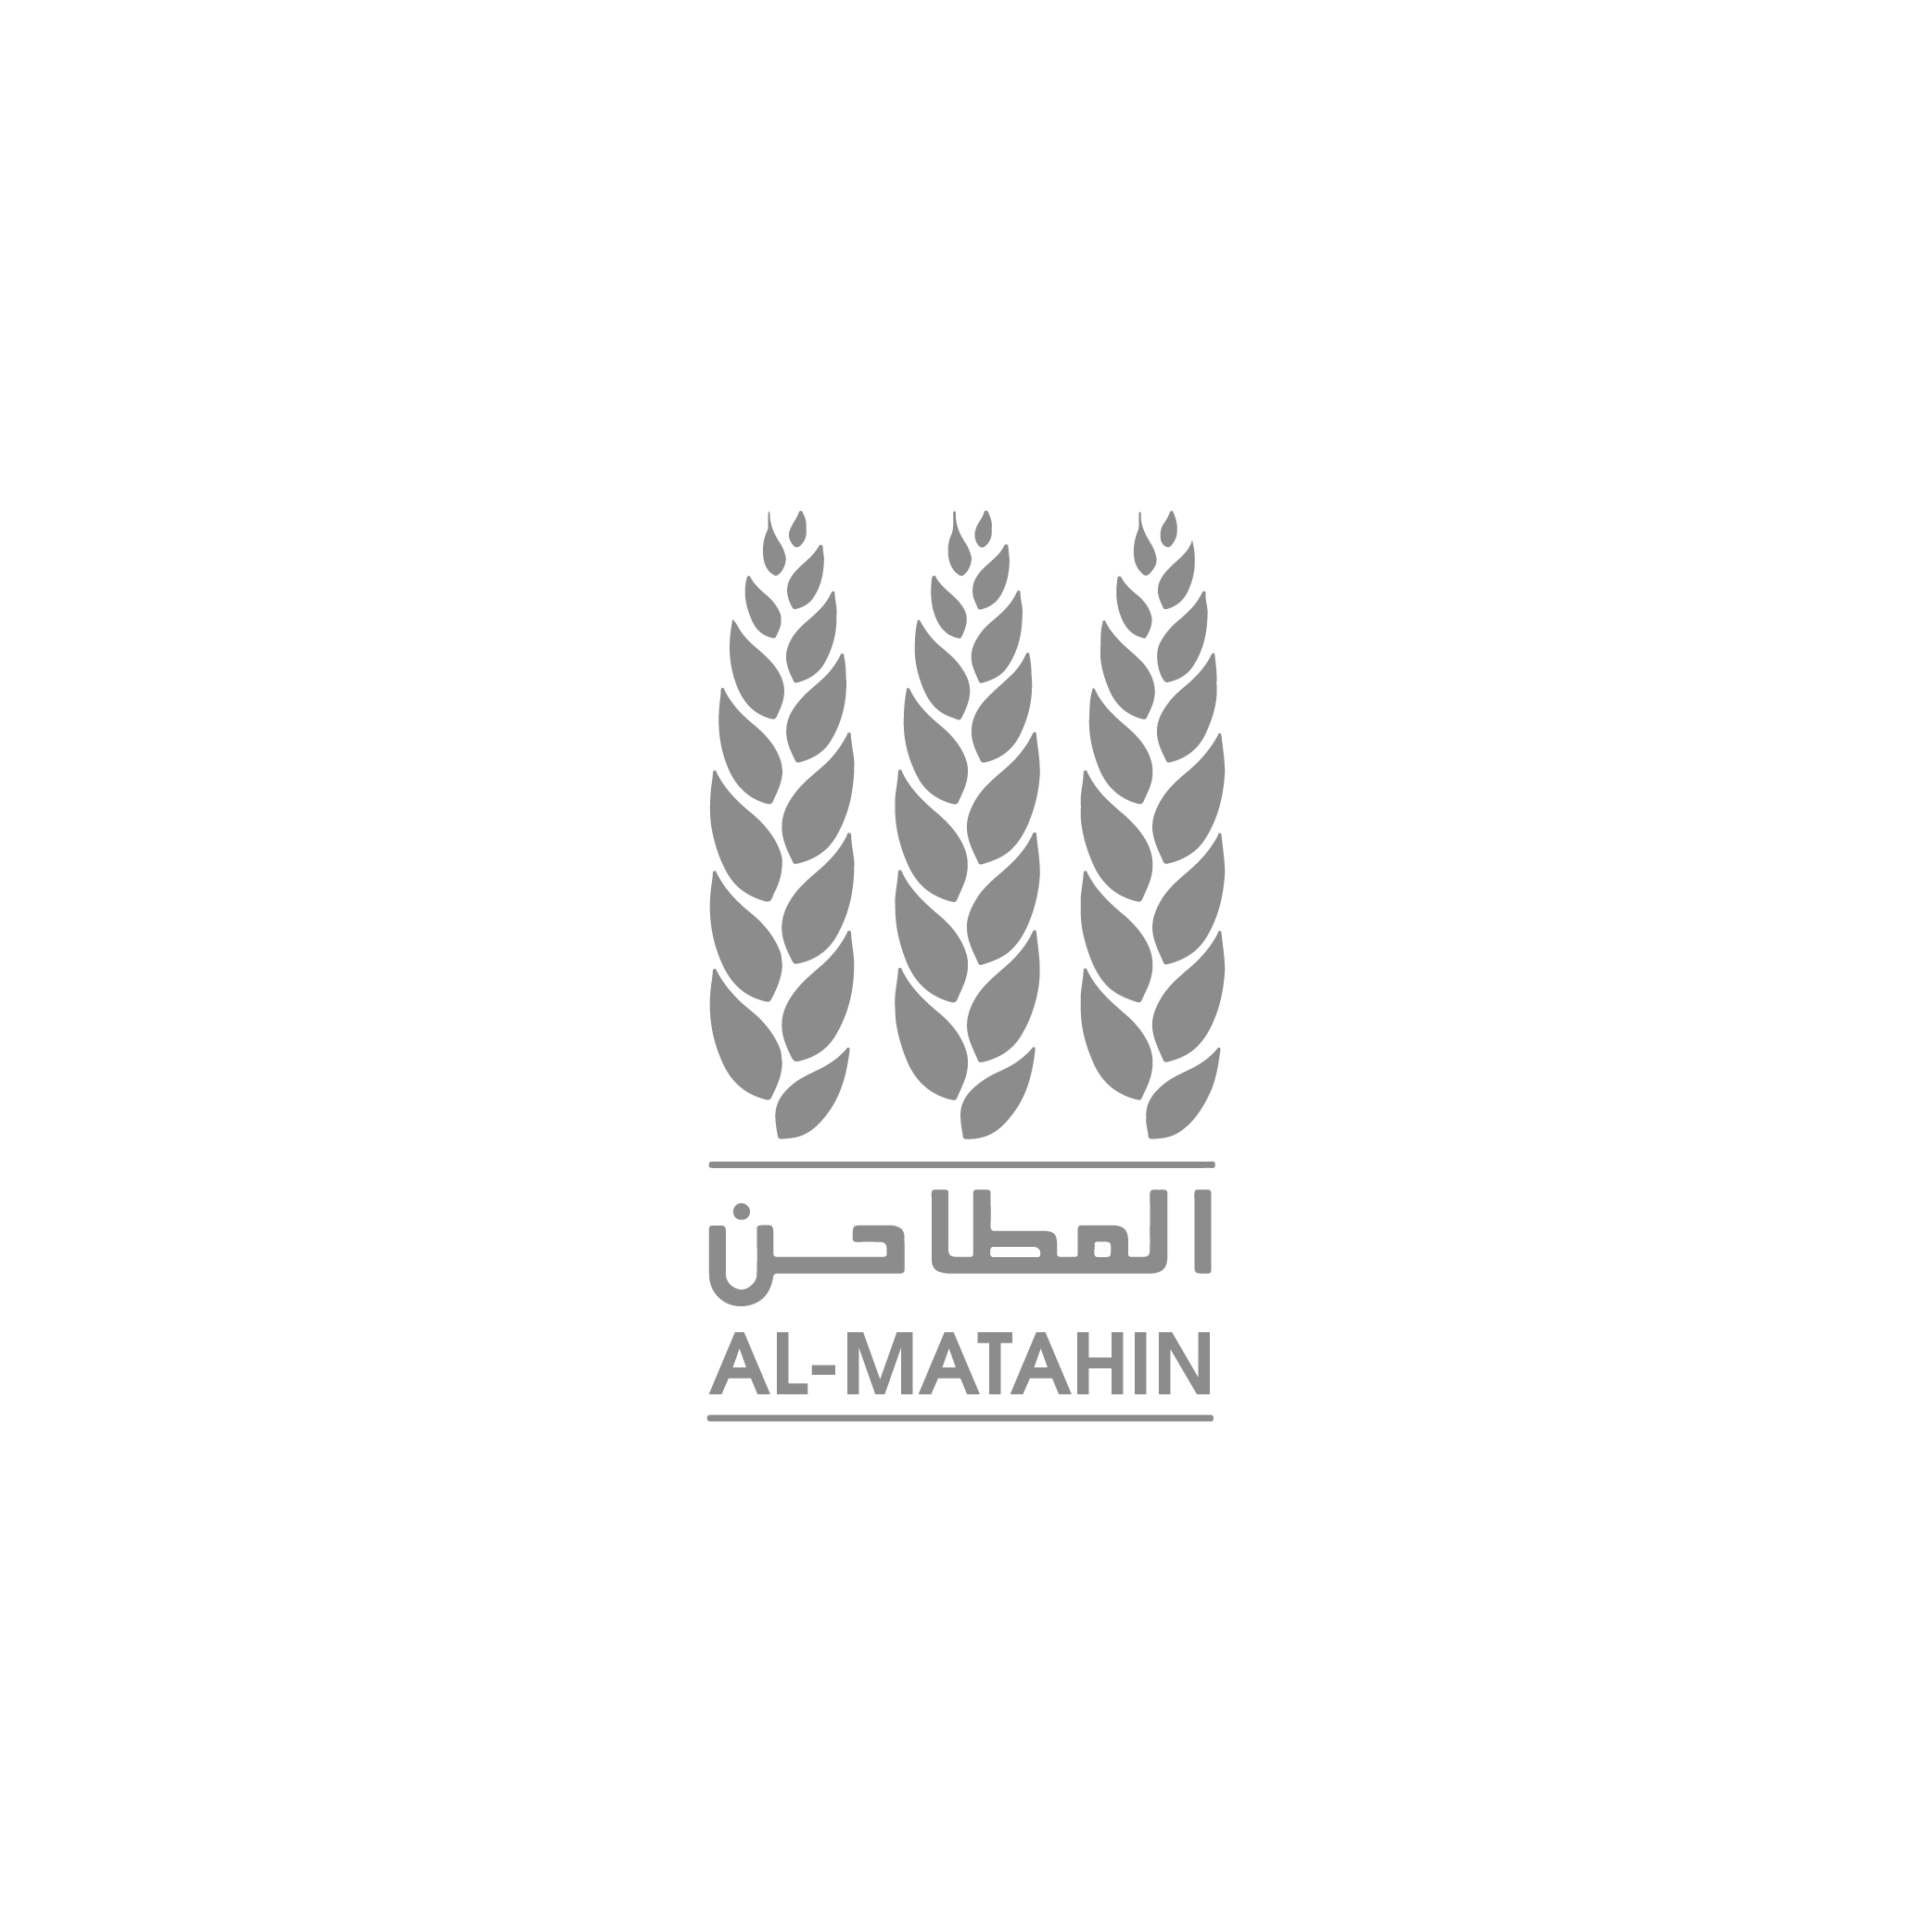 Al-Matahin Supports the “Fina Khair” campaign with BD20 Thousand and donates flour to 4,000 workers